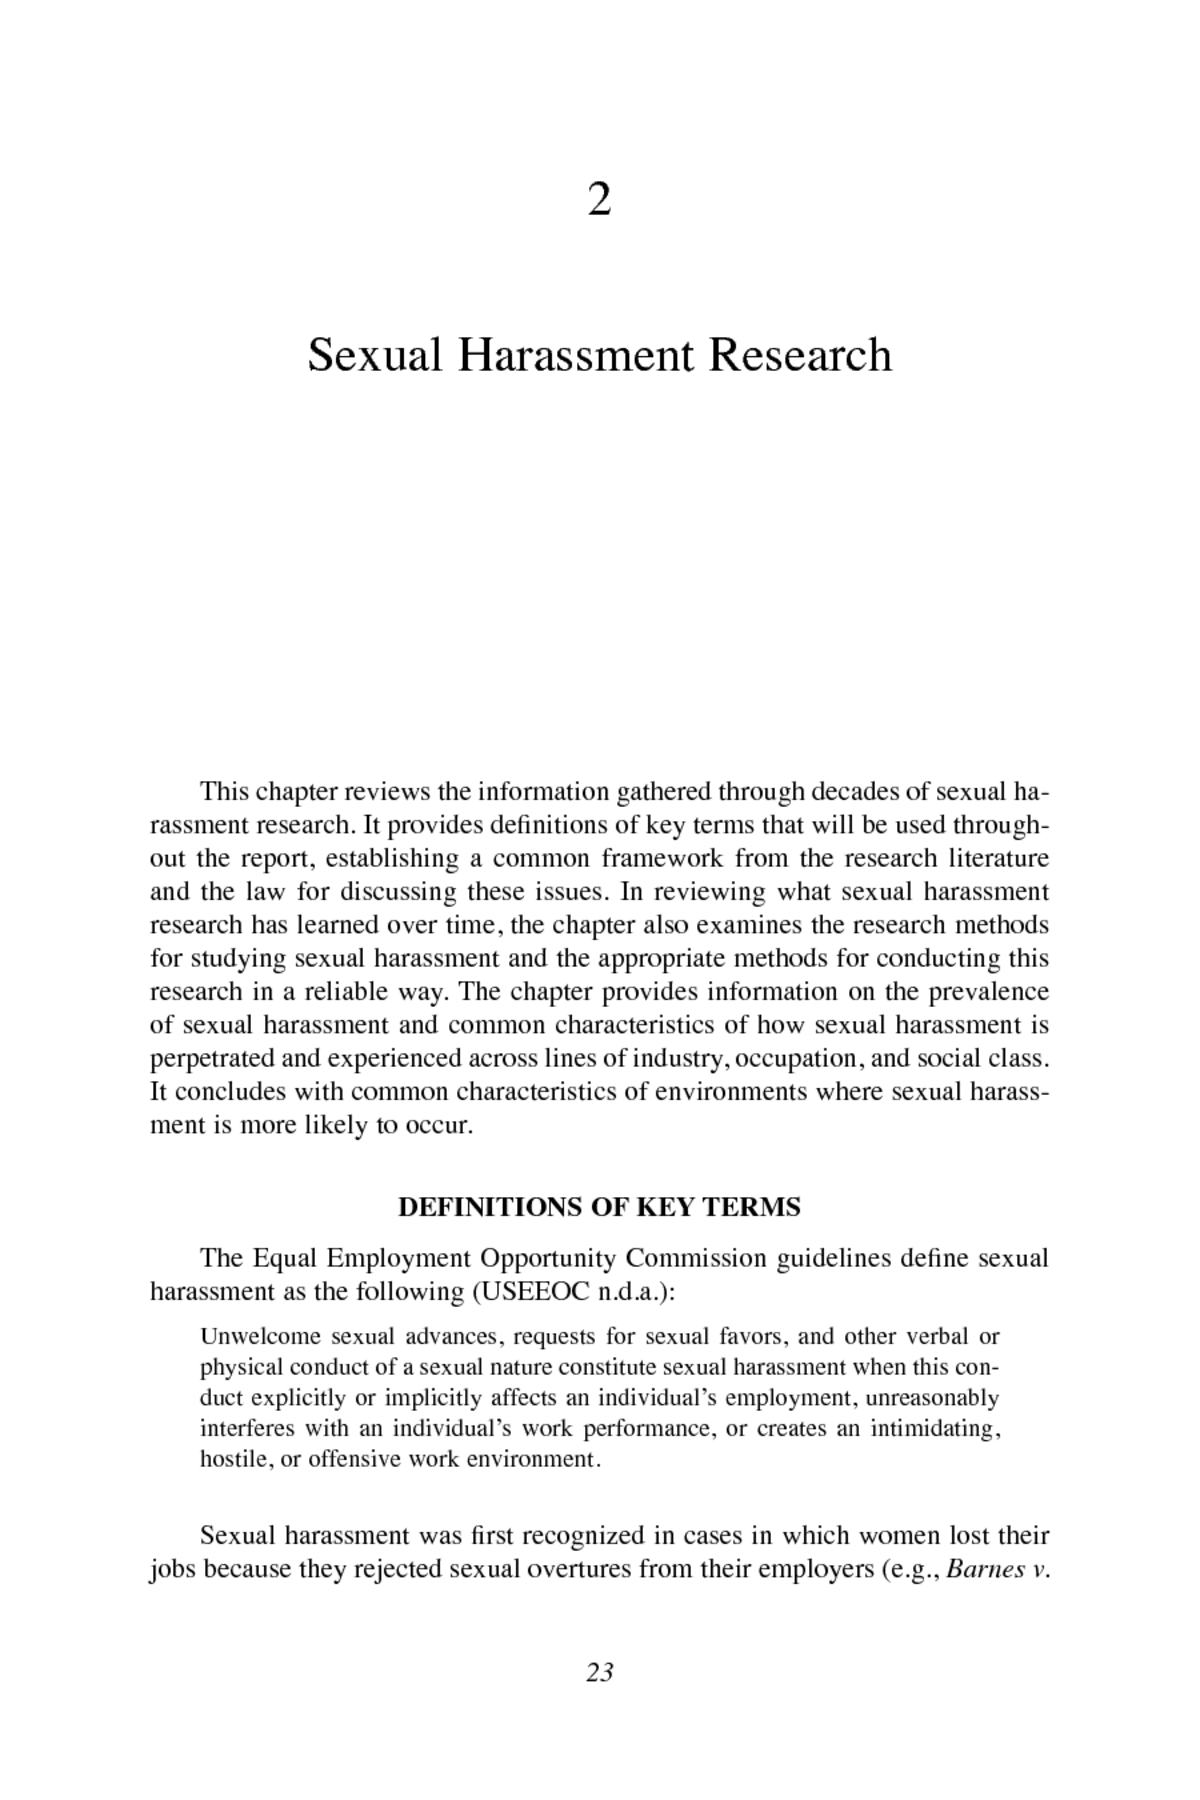 essay against sexual harassment